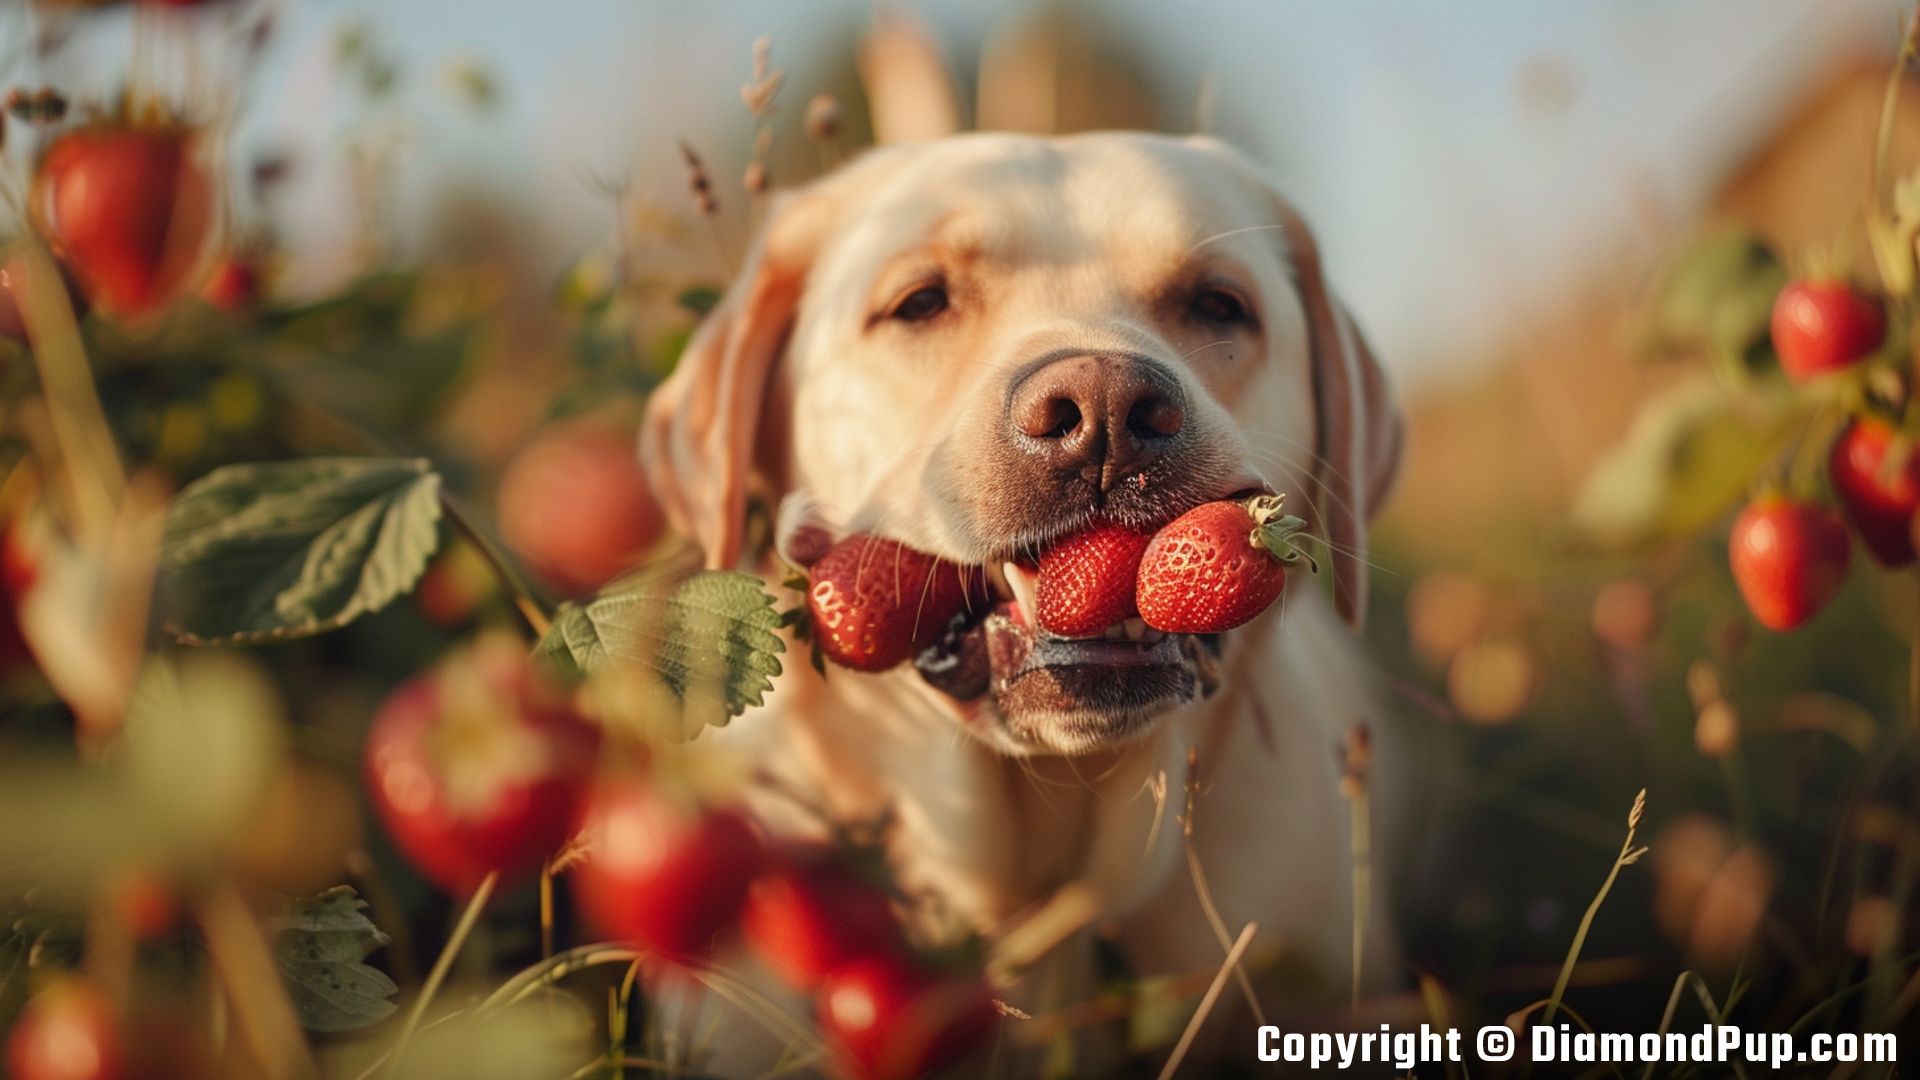 Image of a Playful Labrador Snacking on Strawberries